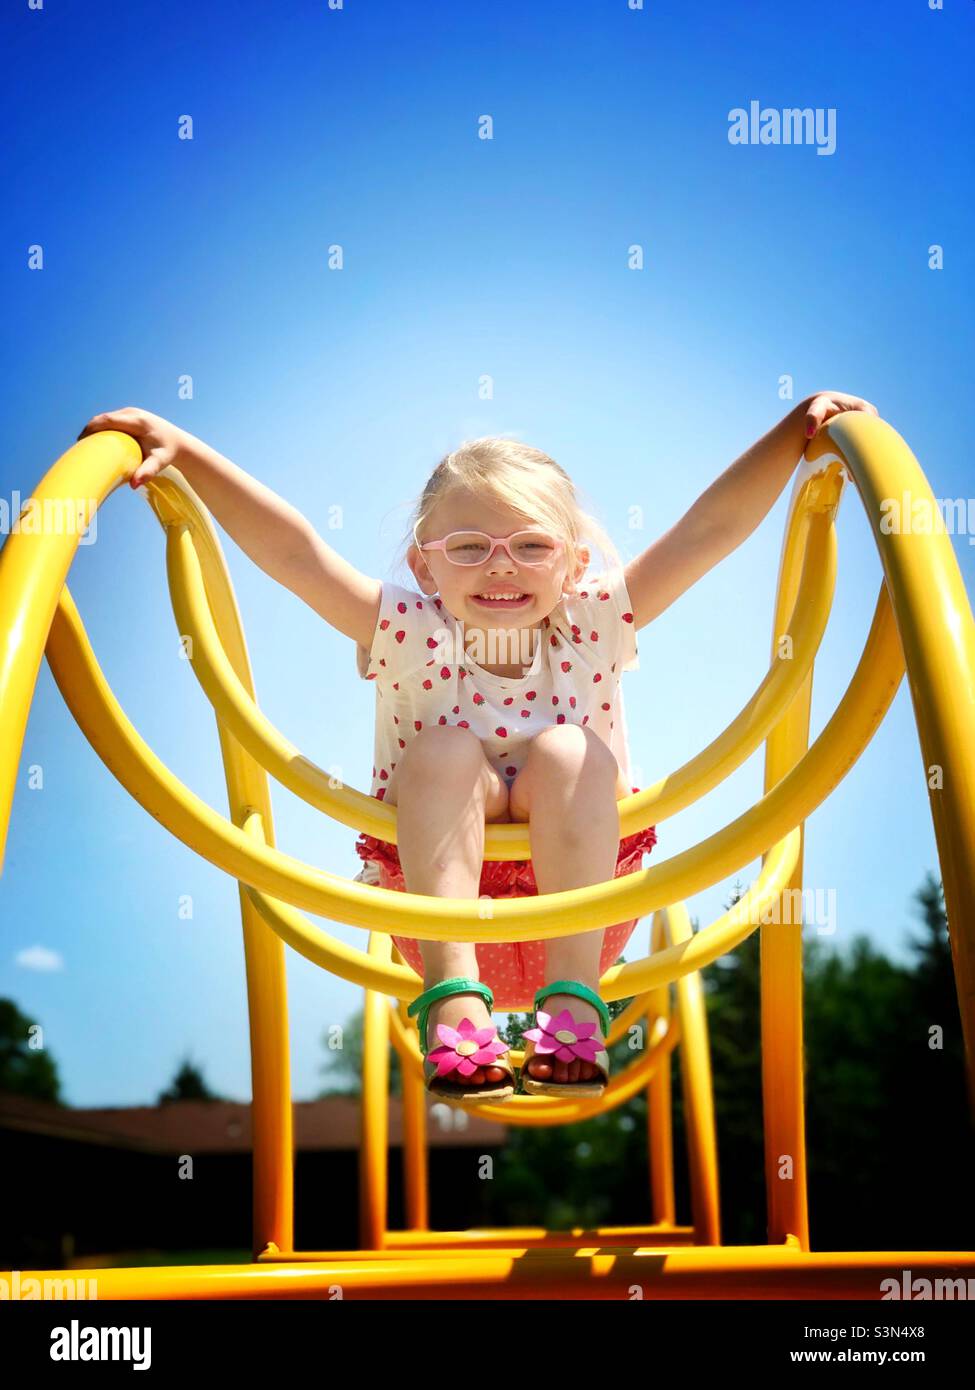 Little blonde girl with a big smile wearing glasses playing on playground equipment Stock Photo